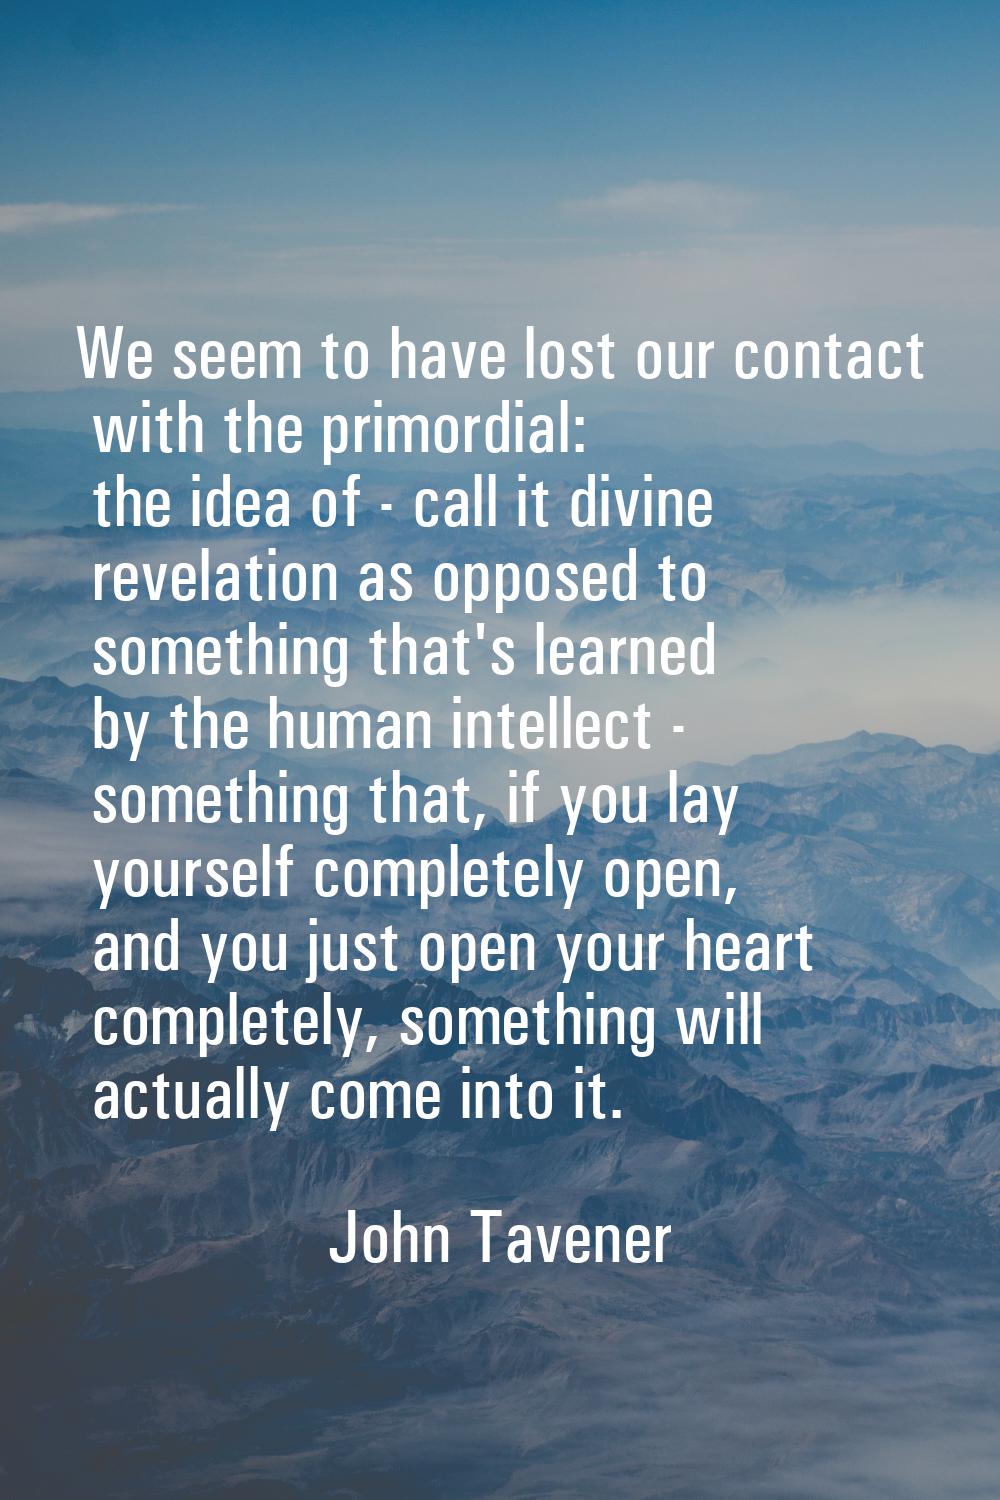 We seem to have lost our contact with the primordial: the idea of - call it divine revelation as op